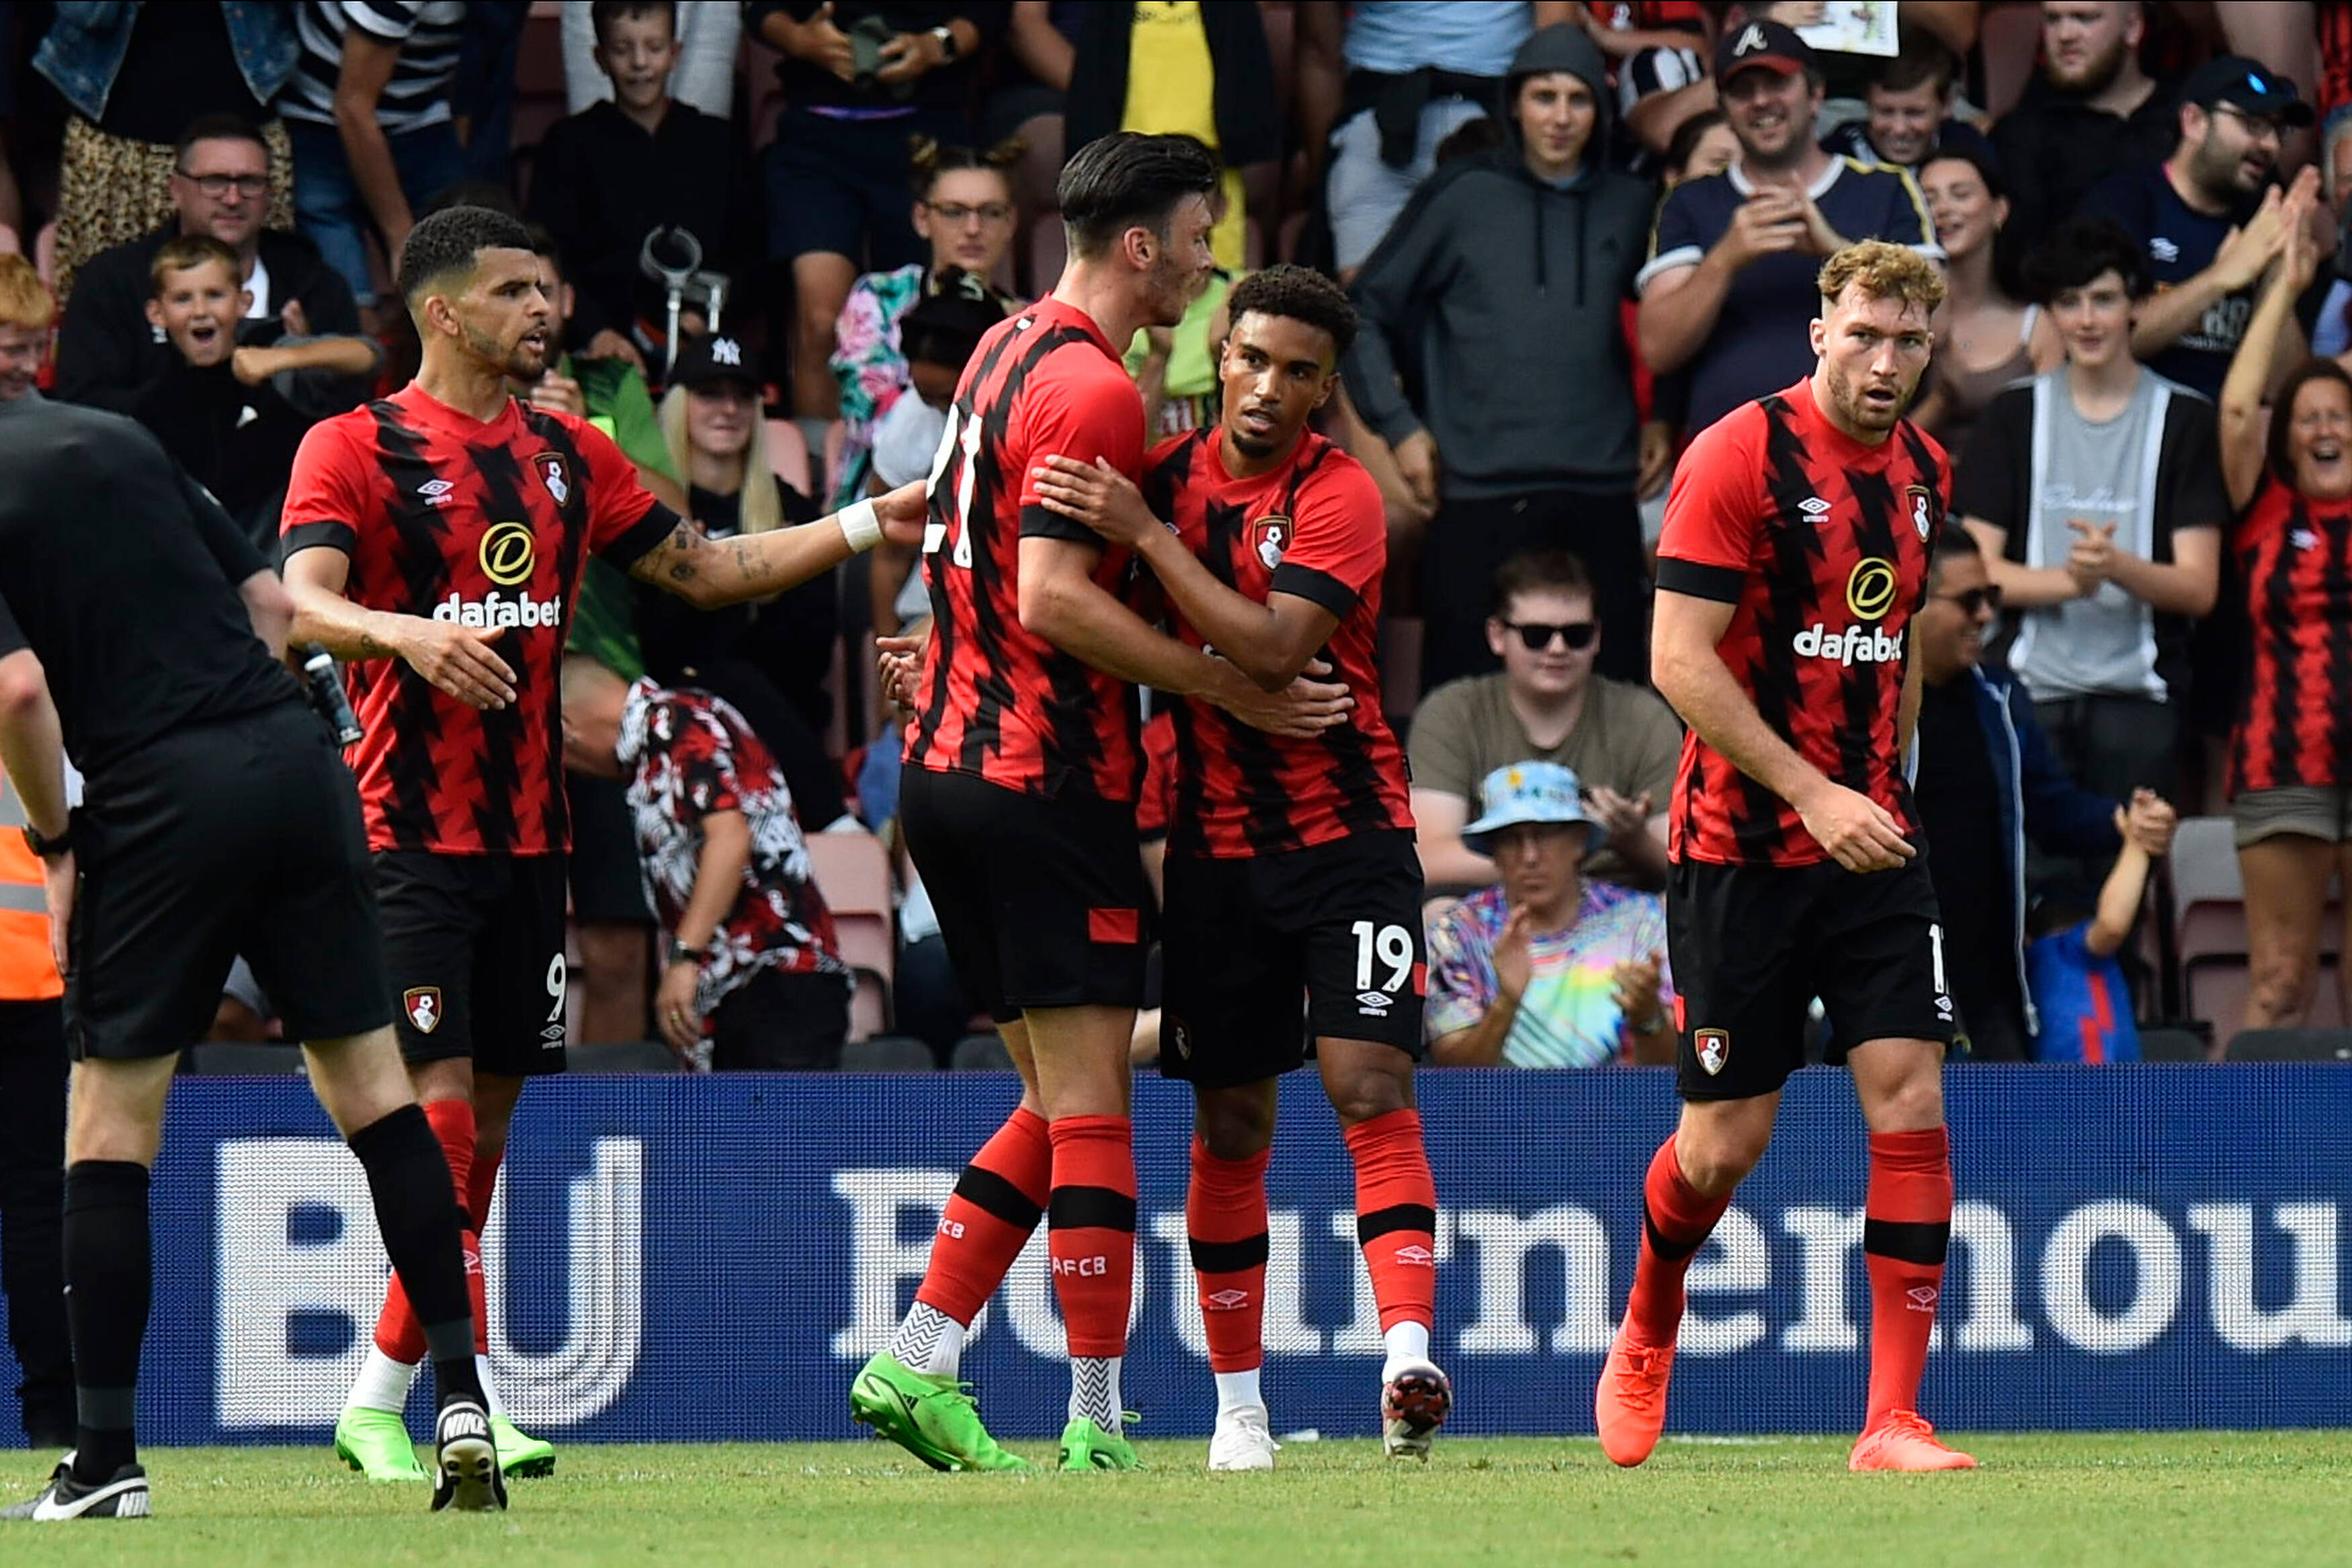 Bournemouth are one of the favourites to go down